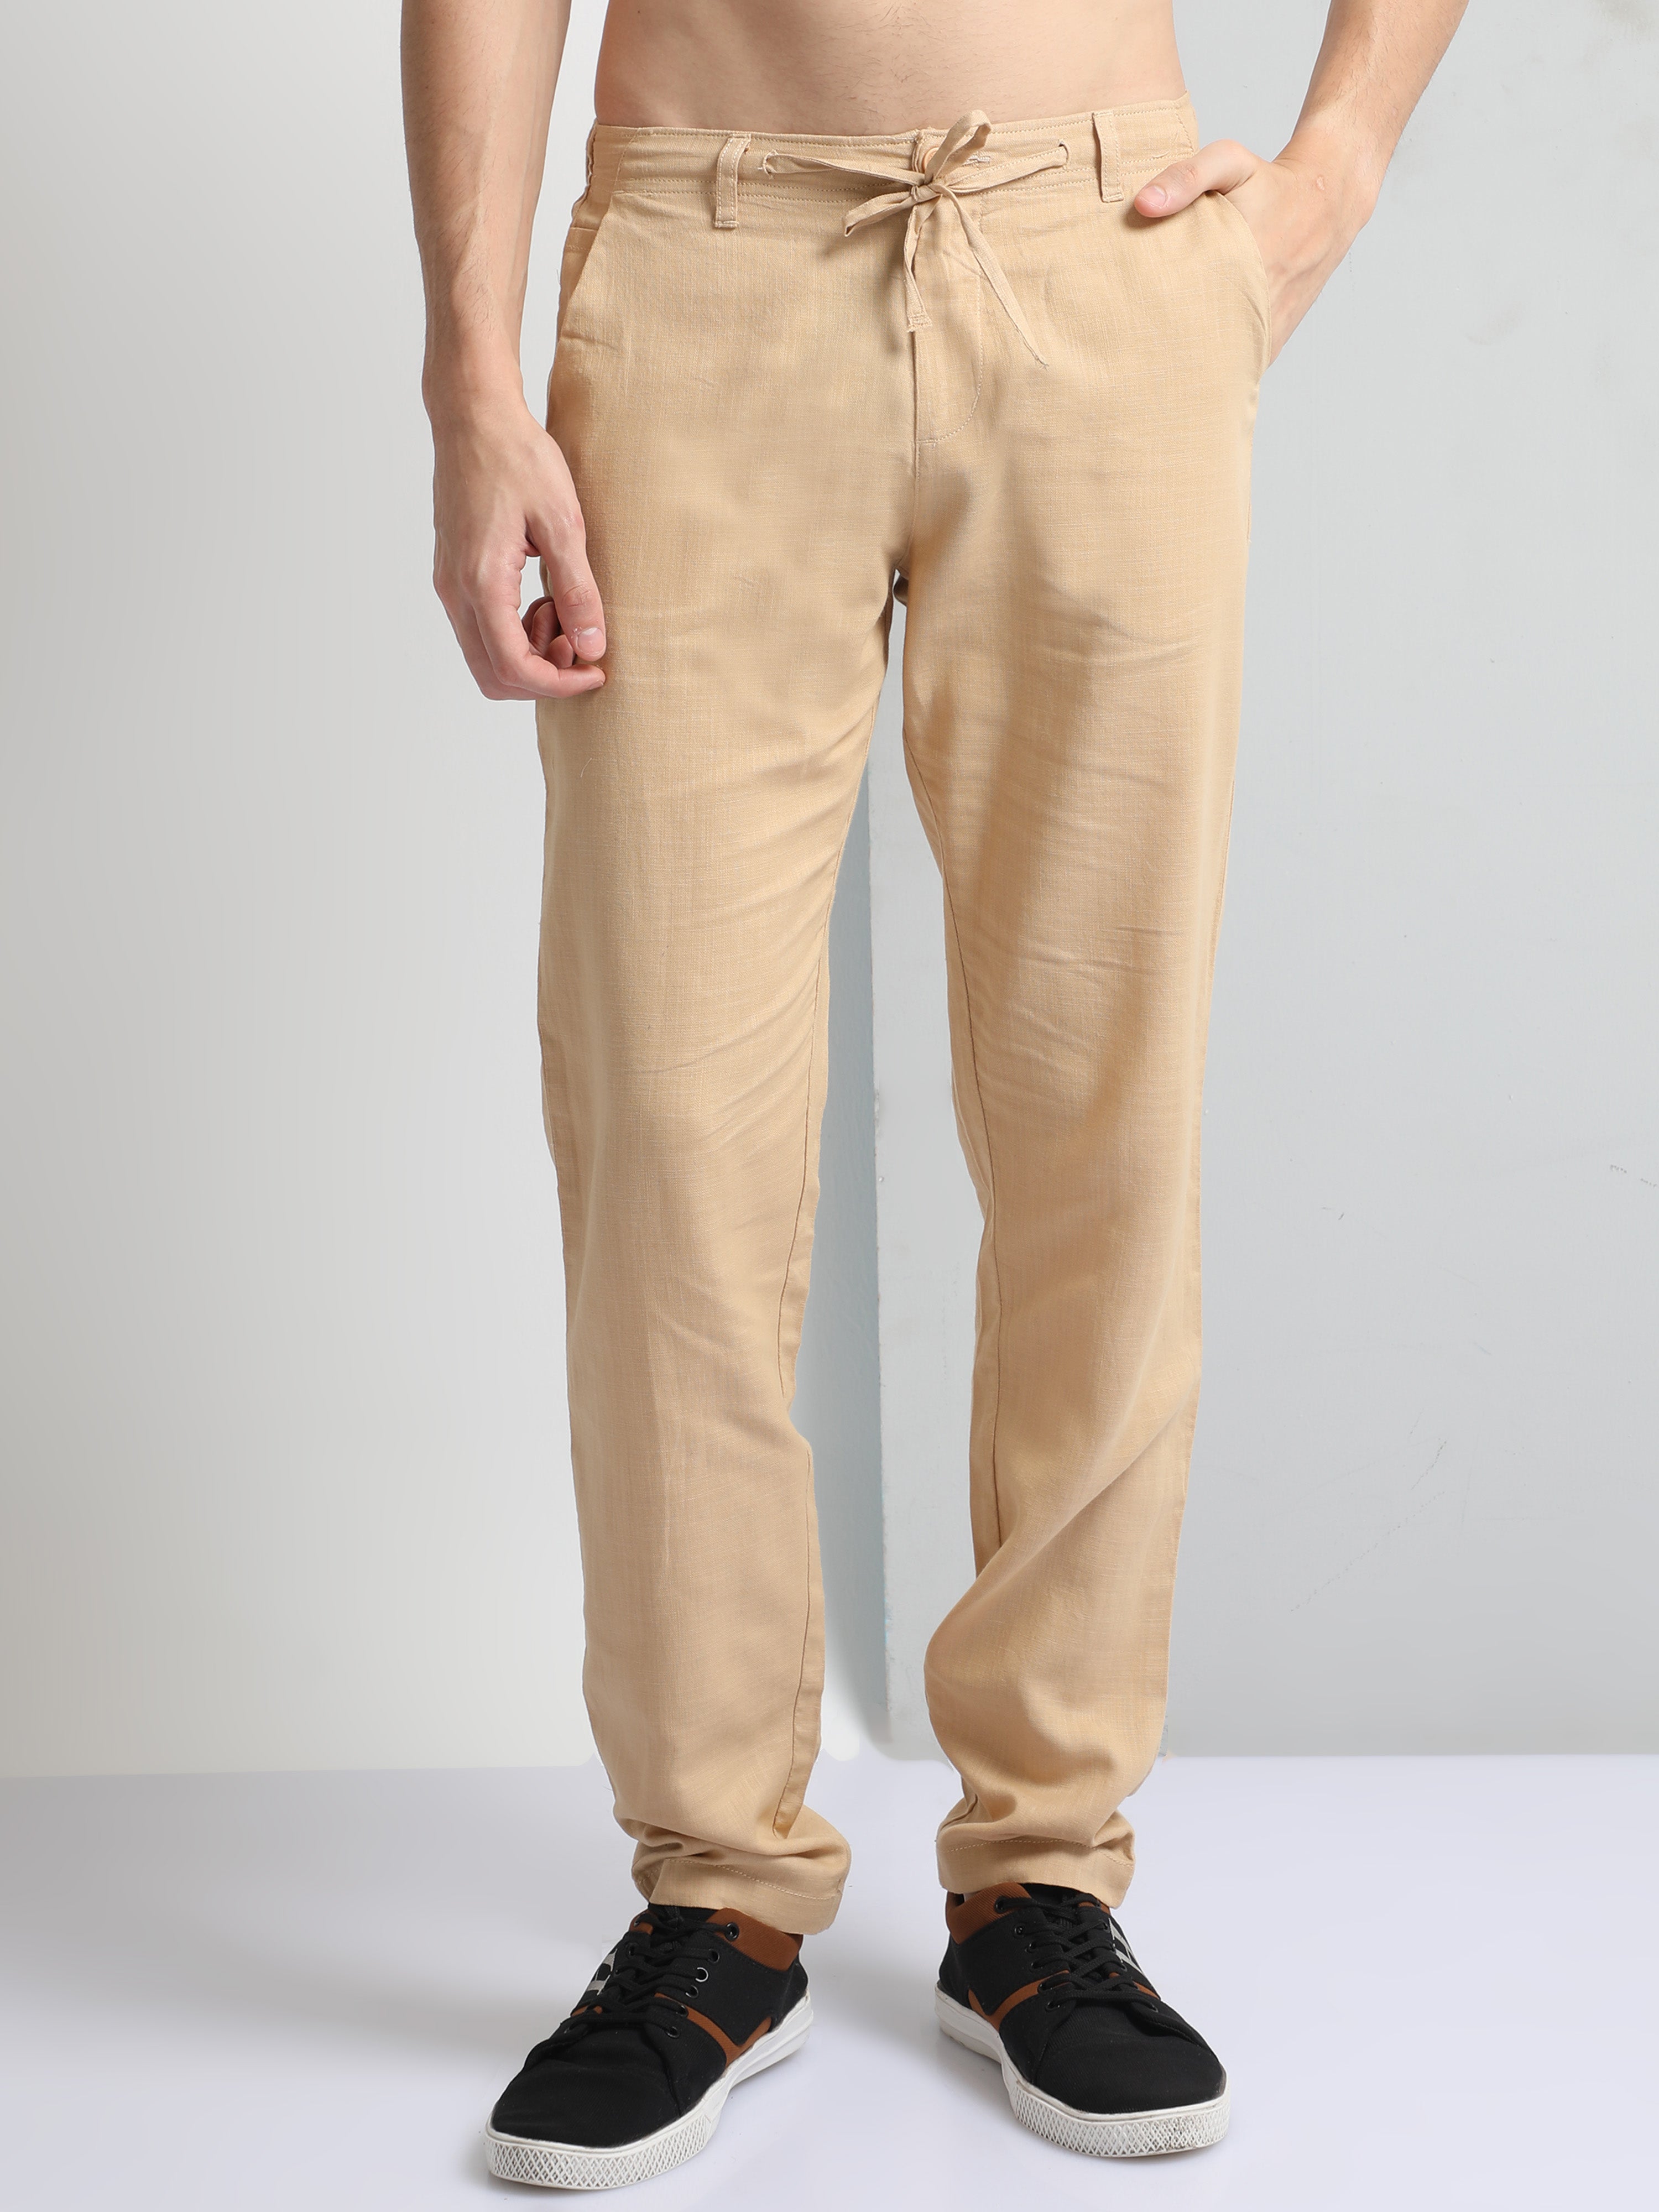 Buy TWILLS Green Solid Cotton Tapered Fit Men's Casual Wear Trousers |  Shoppers Stop